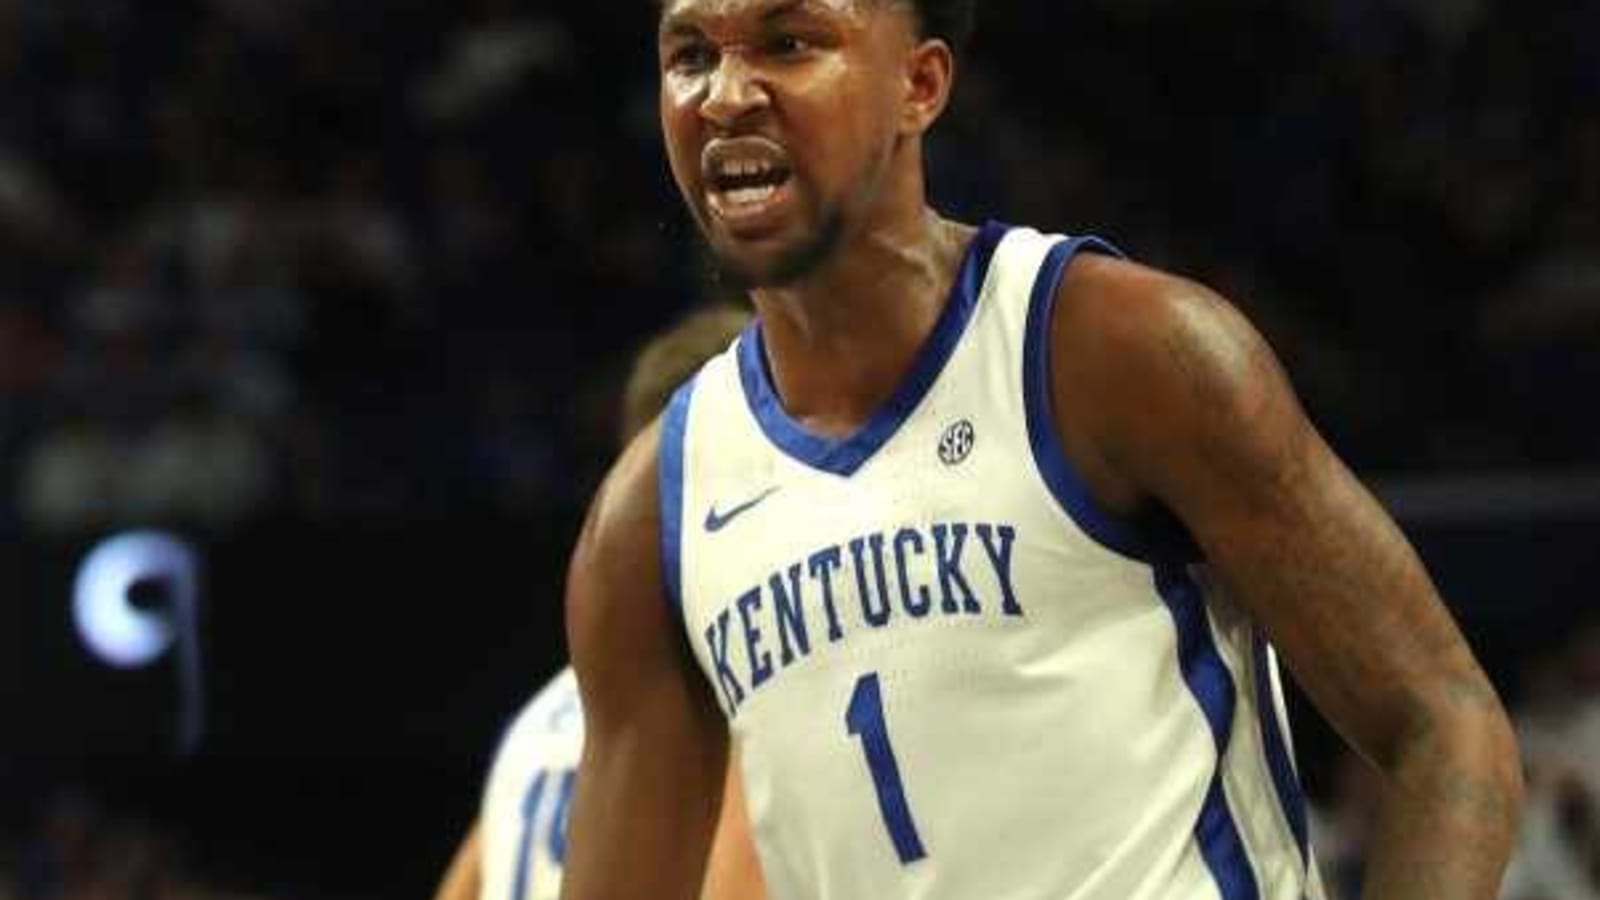 An NBA mock draft from CBS Sports has three Kentucky basketball players going in the first round